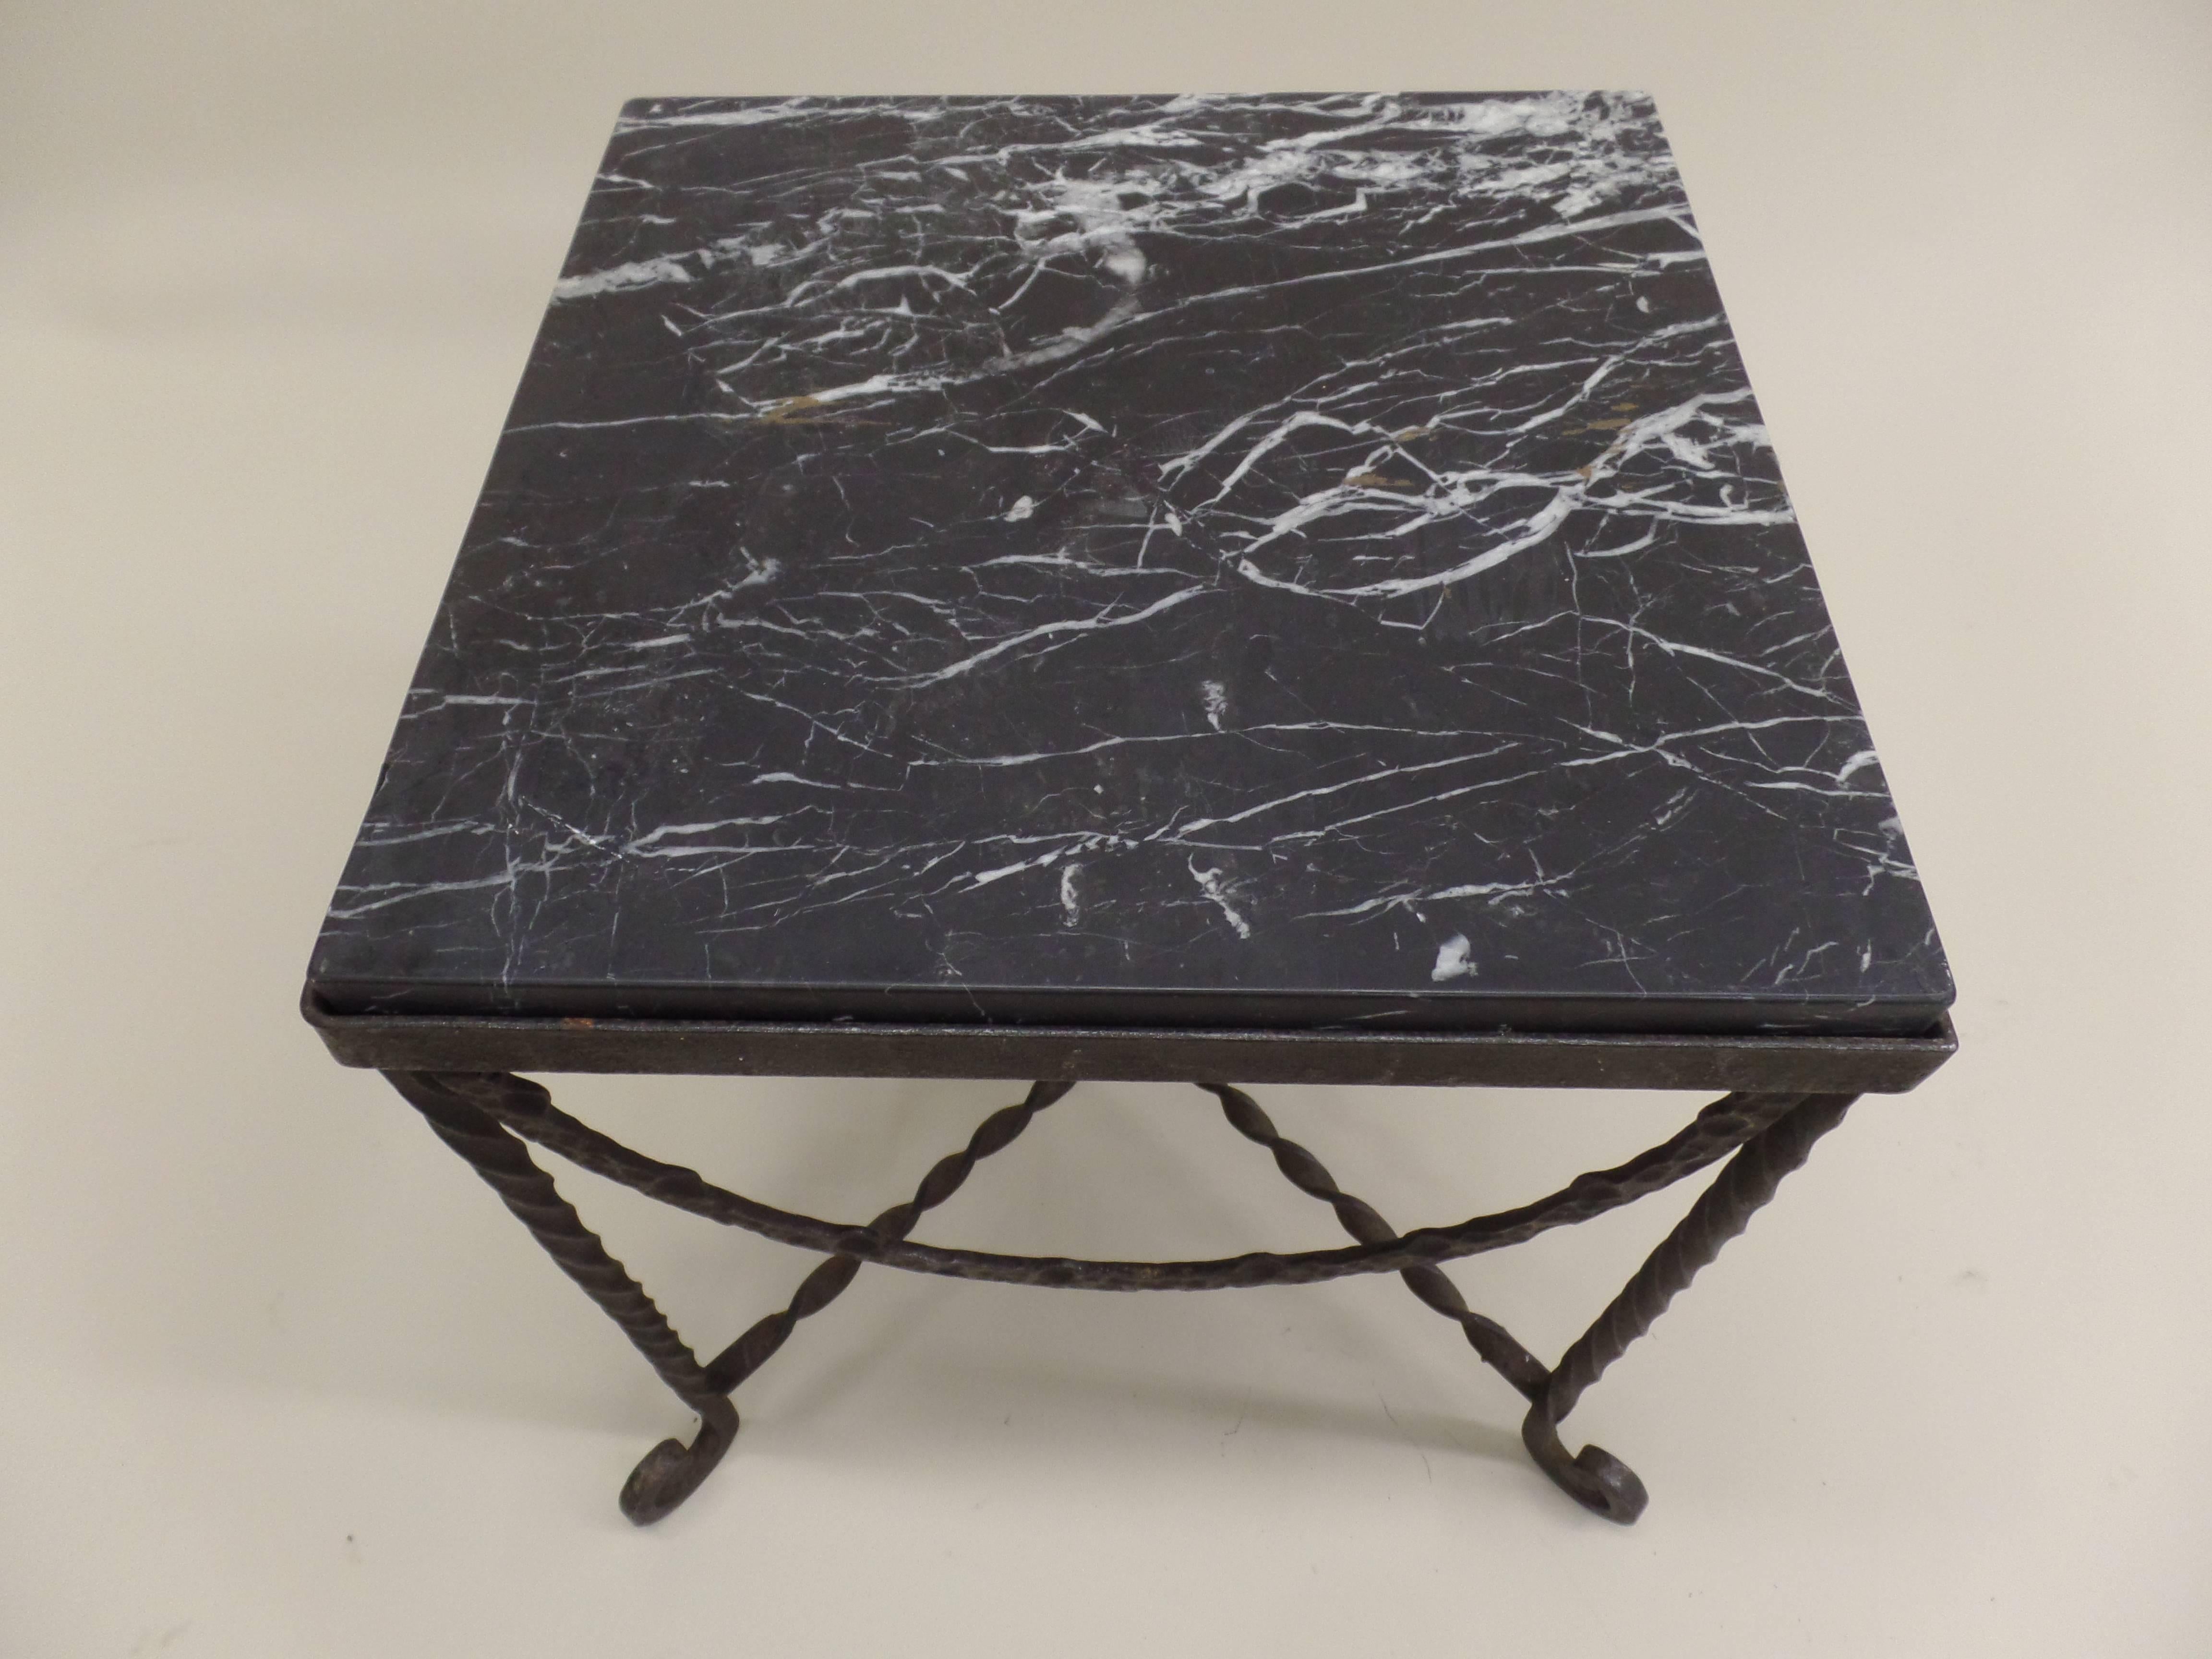 Rare, elegant pair of French Mid-Century hand-hammered forged iron end tables / nightstands / coffee tables. The pieces unite the neoclassical with the Modern and feature hammered iron garlands draping from each side of the table. These are typical